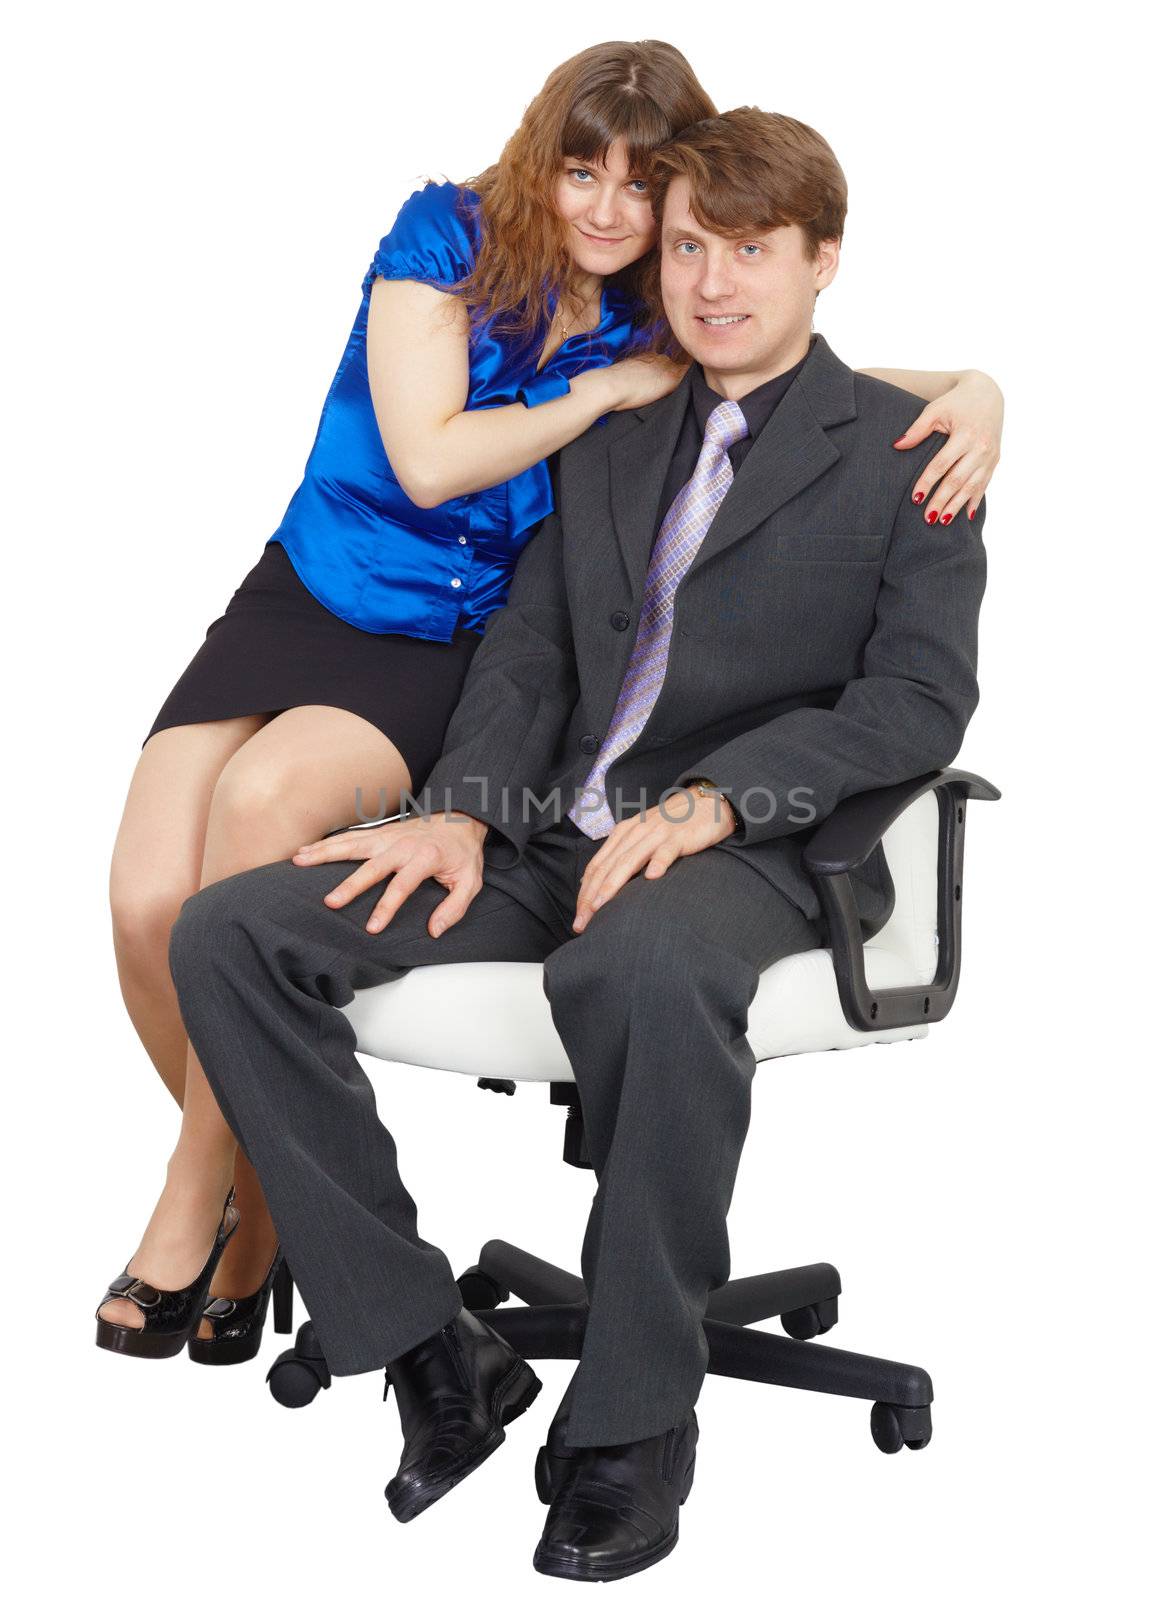 Young people - a man and a woman sitting on a chair on white